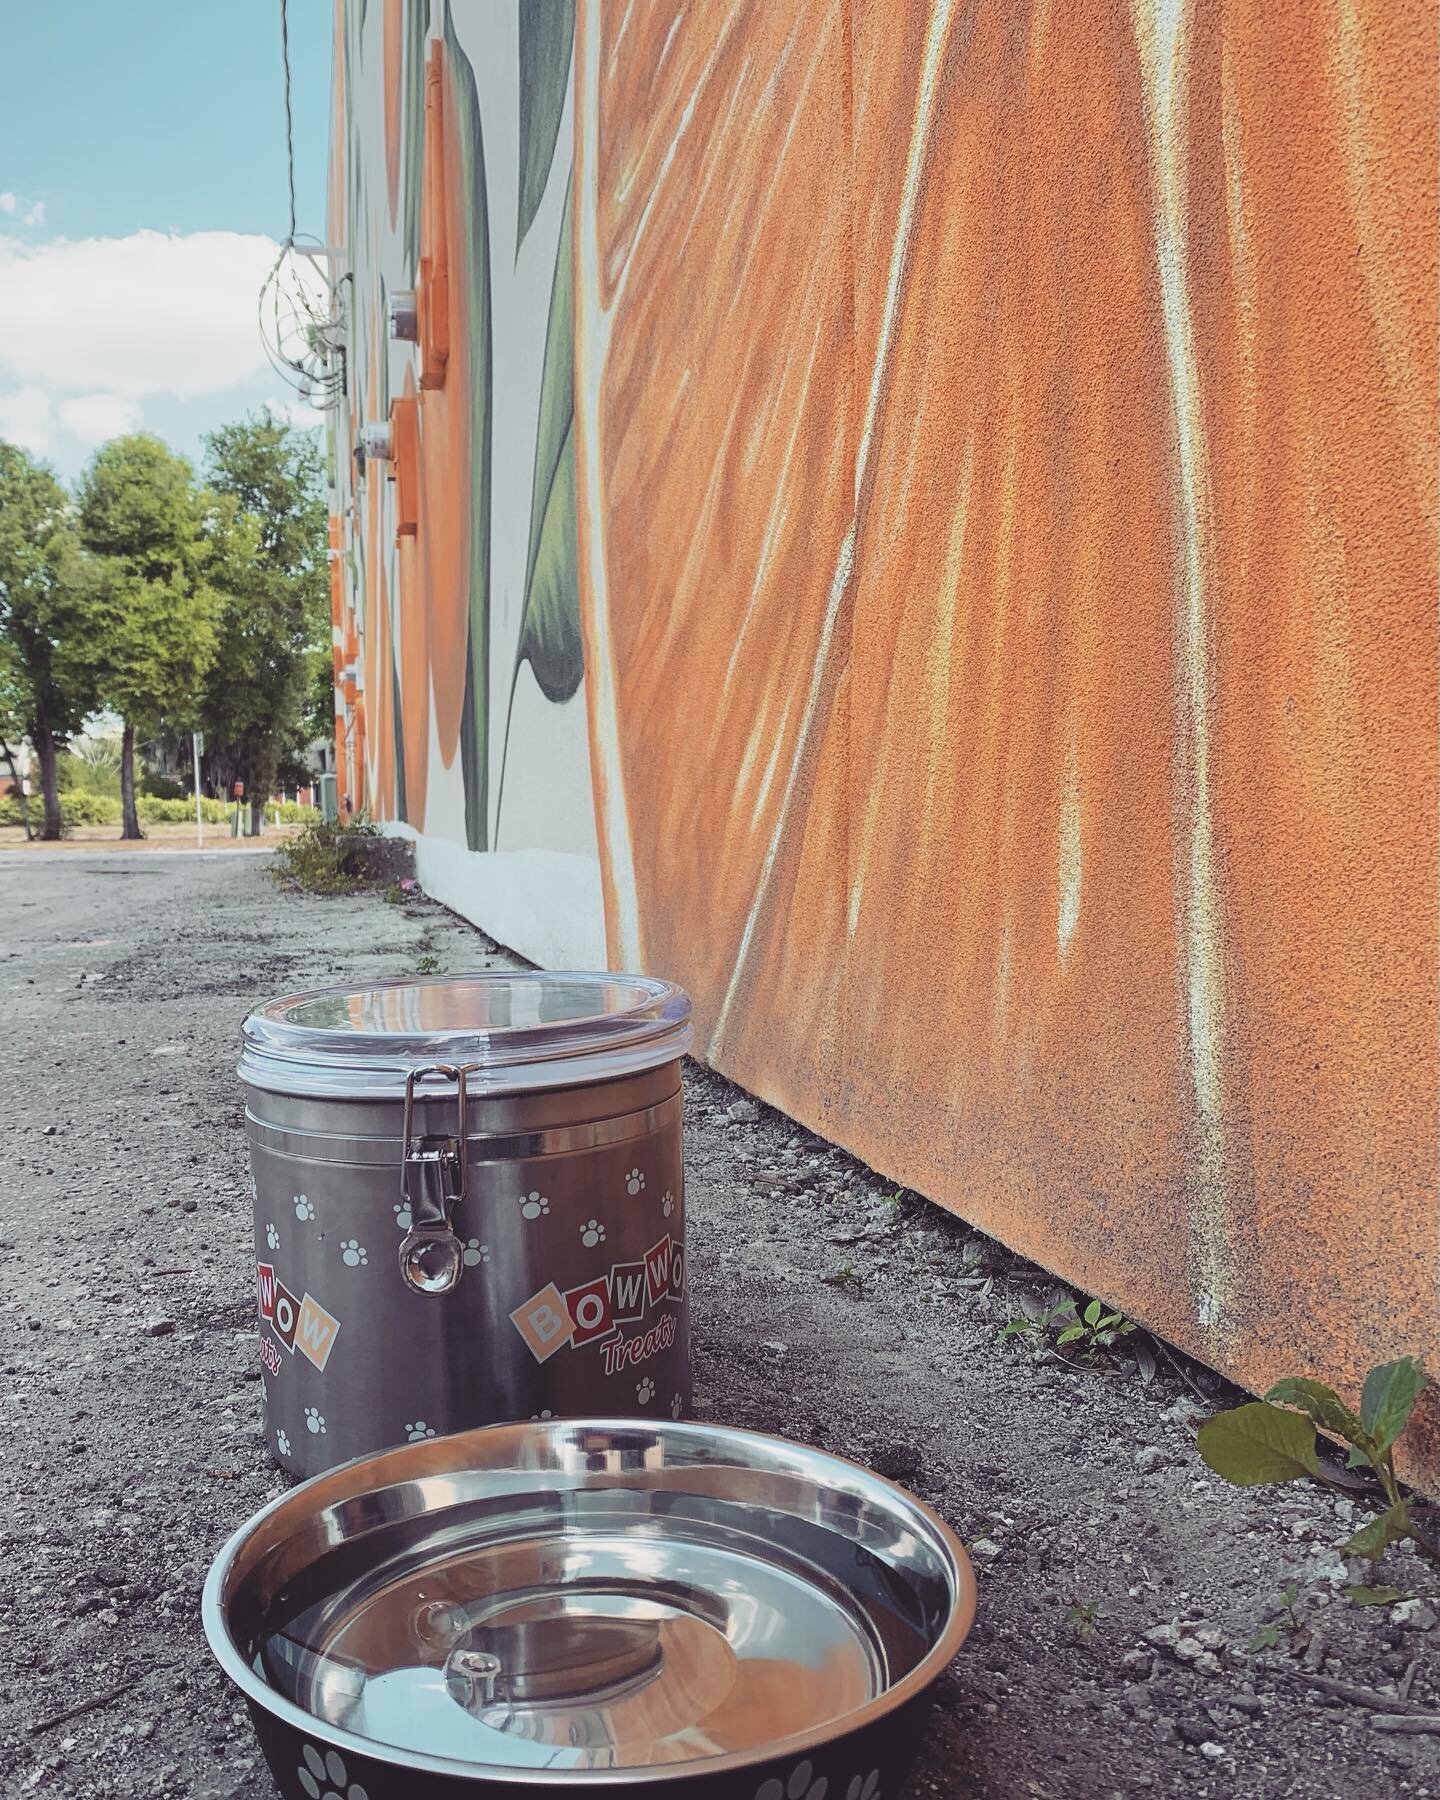 Four legged friends frequent our mural in downtown Lake Wales. For this reason we&rsquo;ve provided a little water and special treats😍 #dogslovedowntown #lakewalesmainstreet